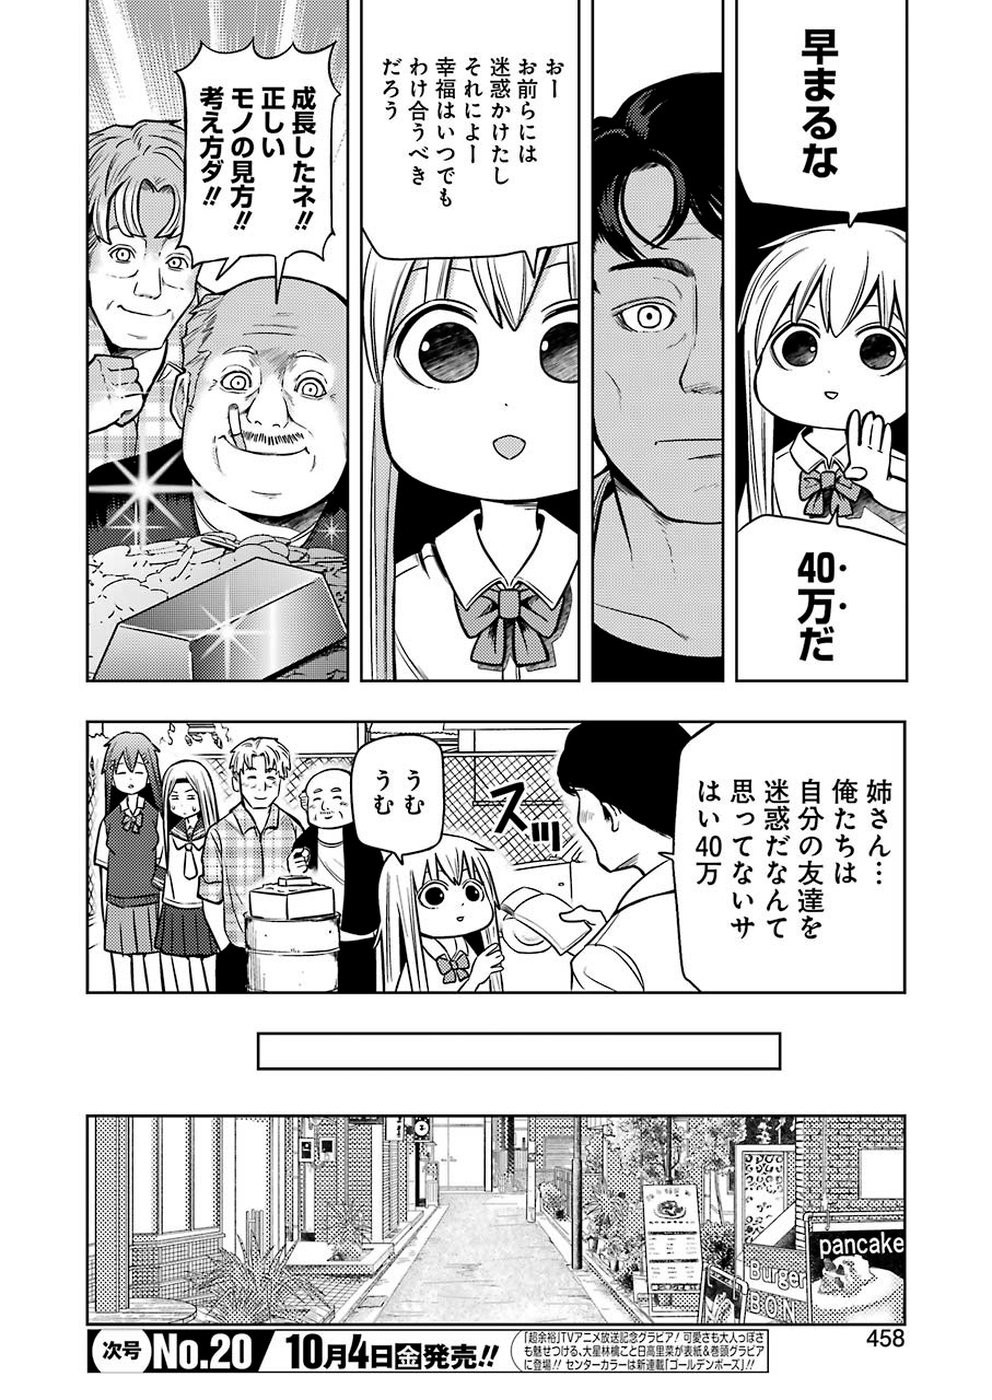 + Tic Nee-san - Chapter 191 - Page 2